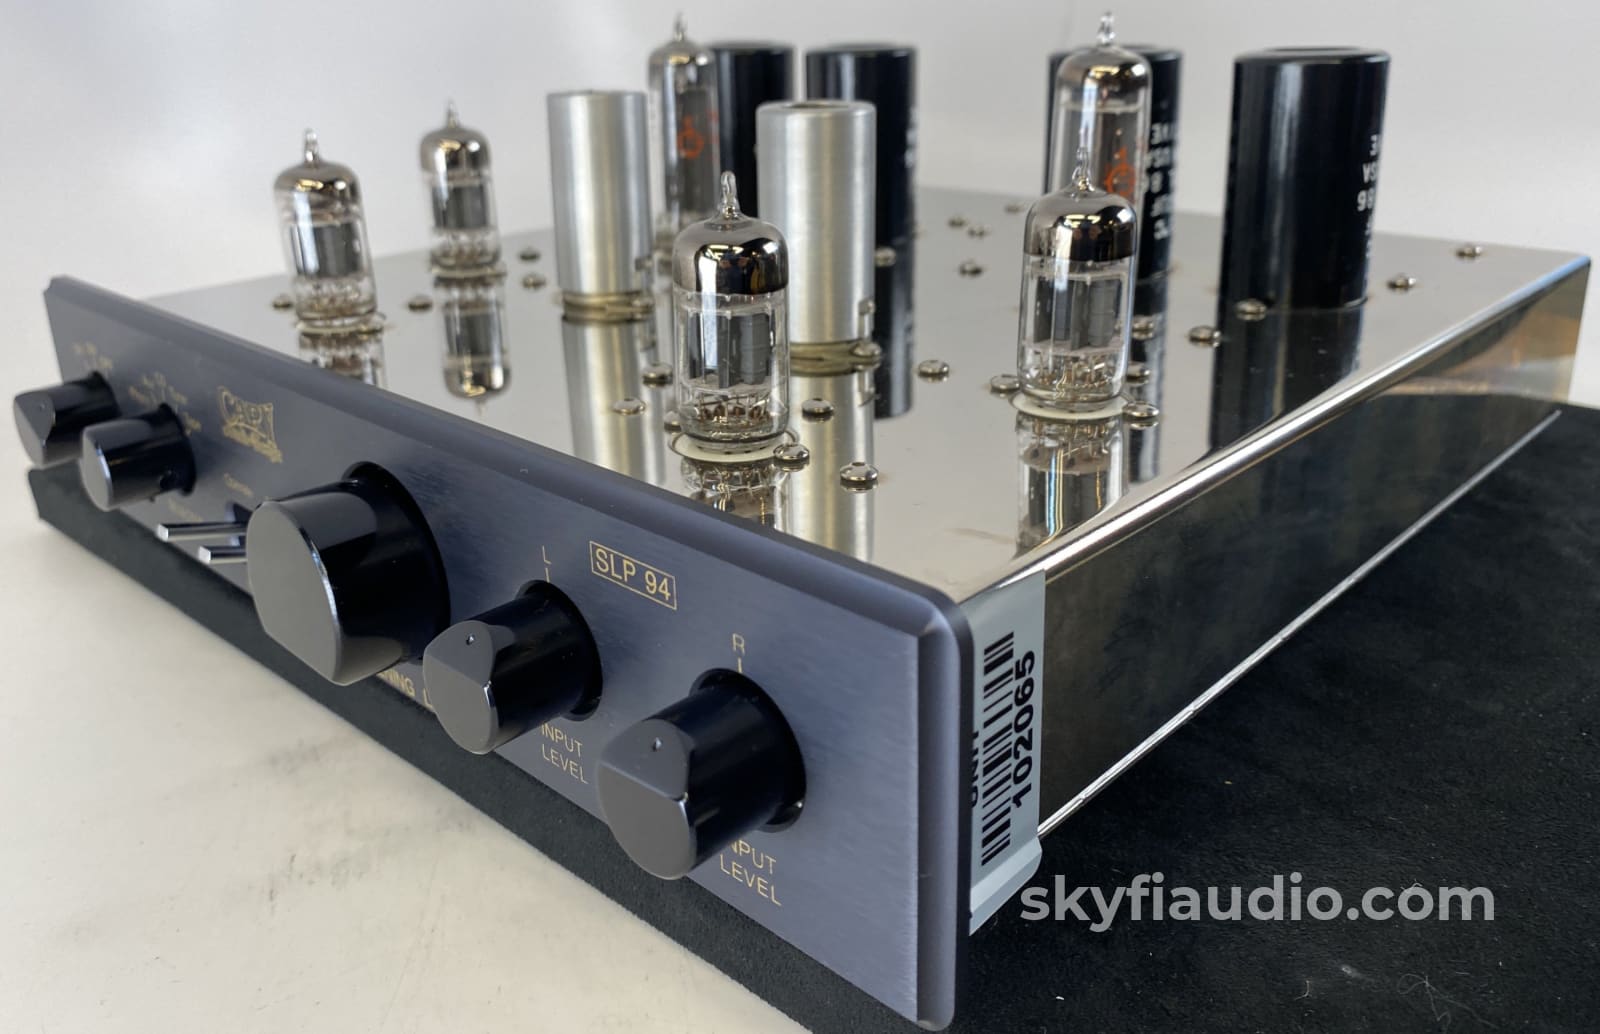 Cary Audio Slp-94 Tube Preamp W/Phono Stage And Separate Power Supply Amplifier